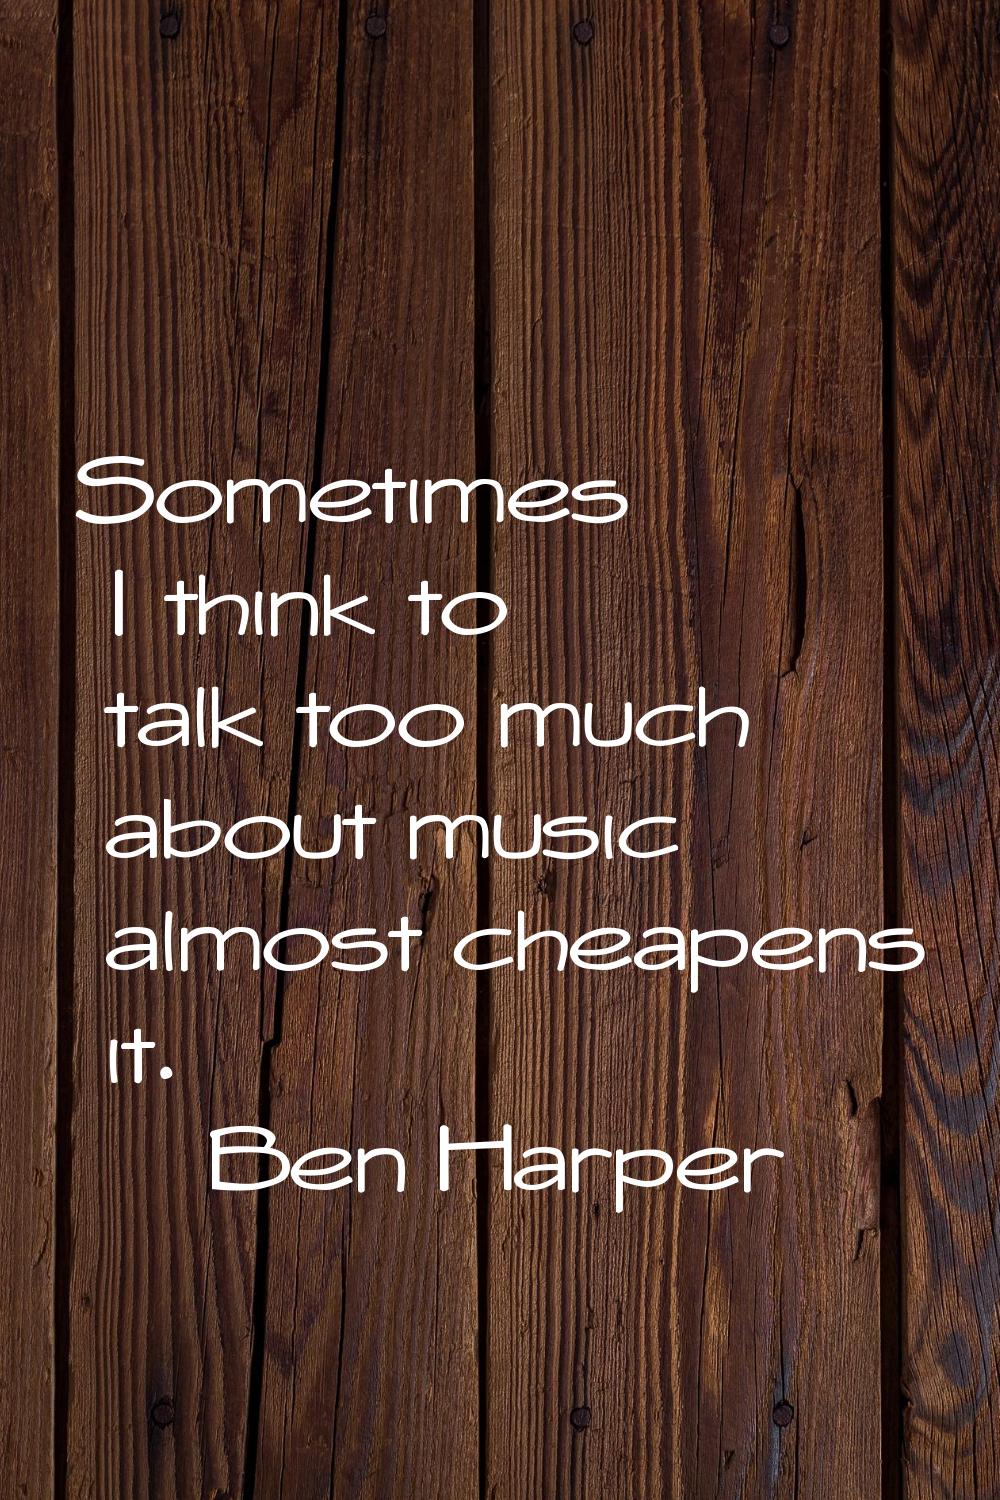 Sometimes I think to talk too much about music almost cheapens it.